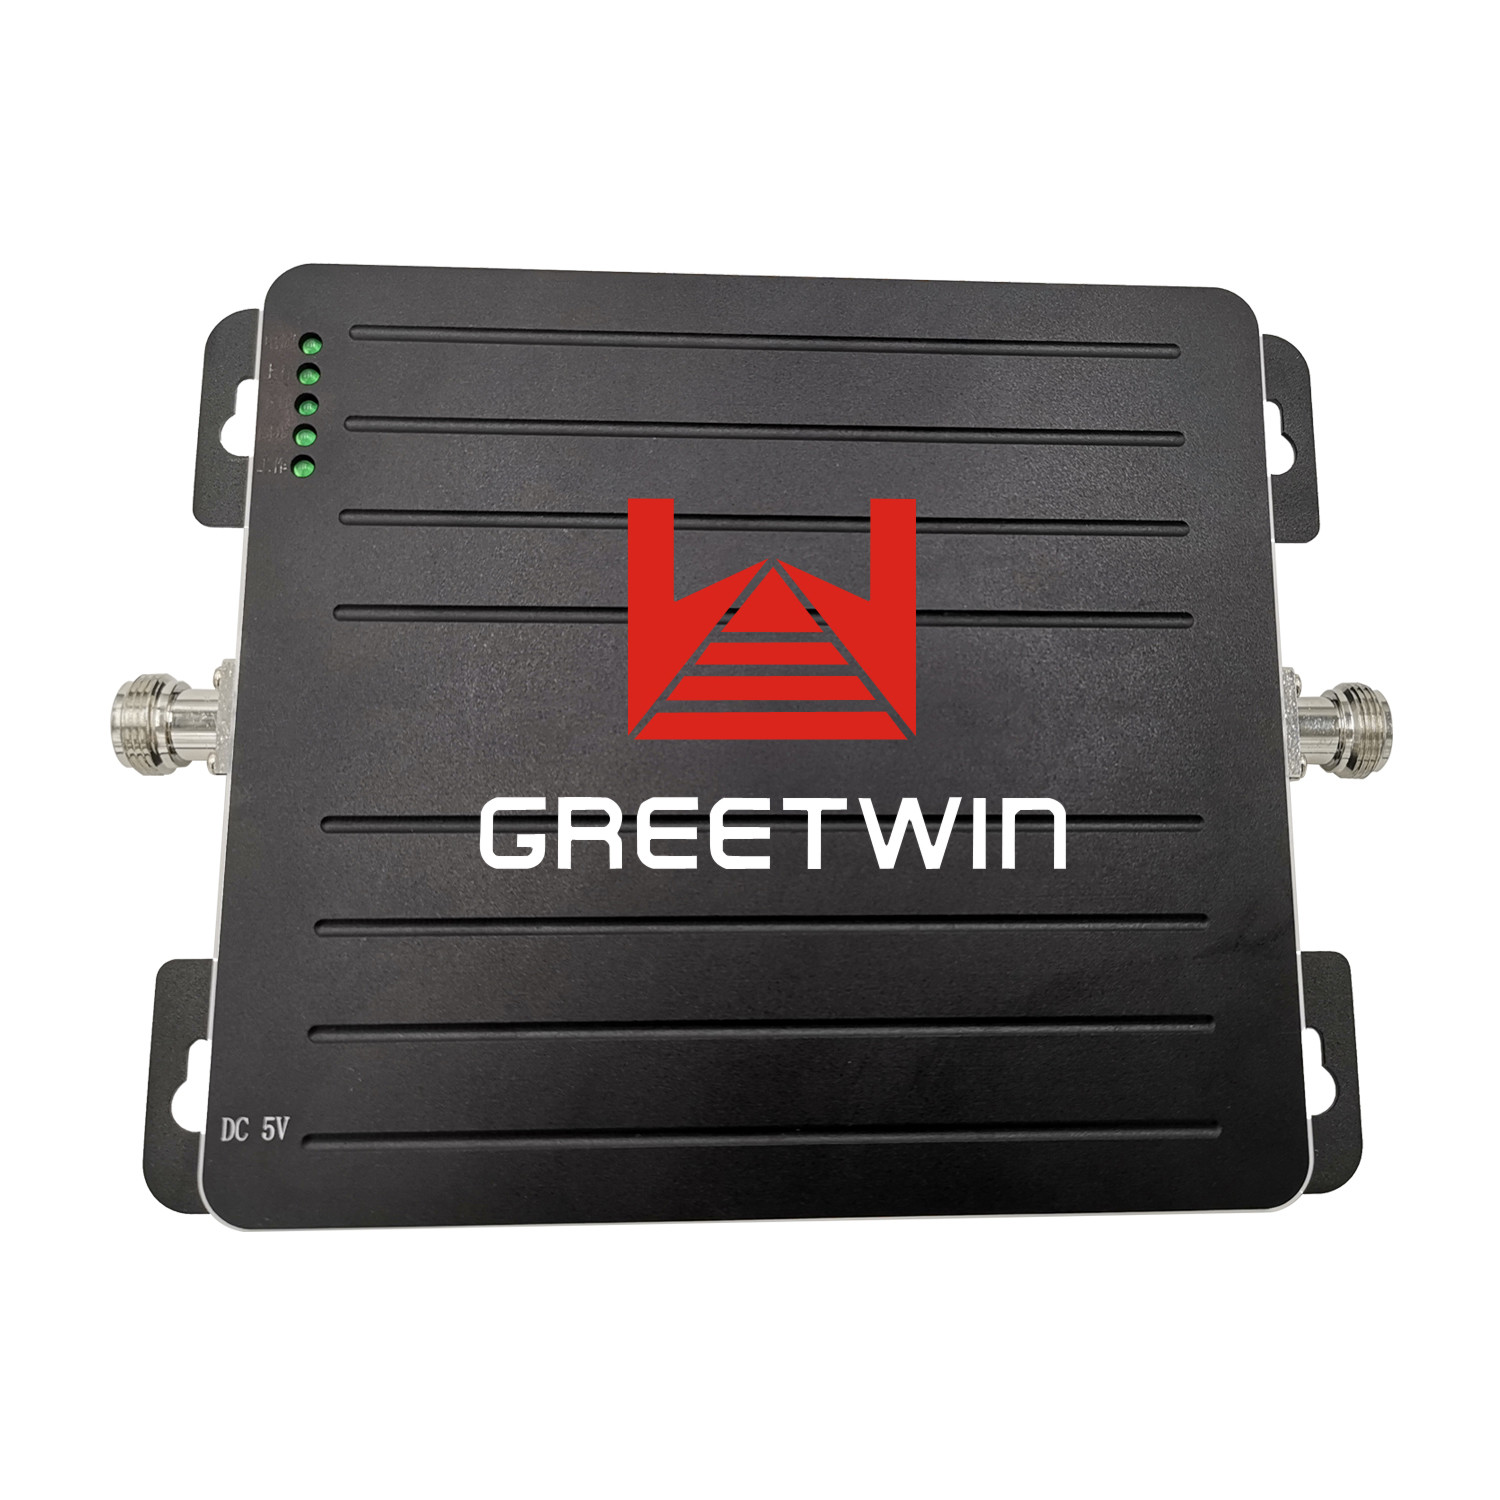 Indoor 20dBm 2G 3G 4G DCS1800MHz LTE2300MHz Dual Band Mobile Network Booster Signal Repeater With Antenna